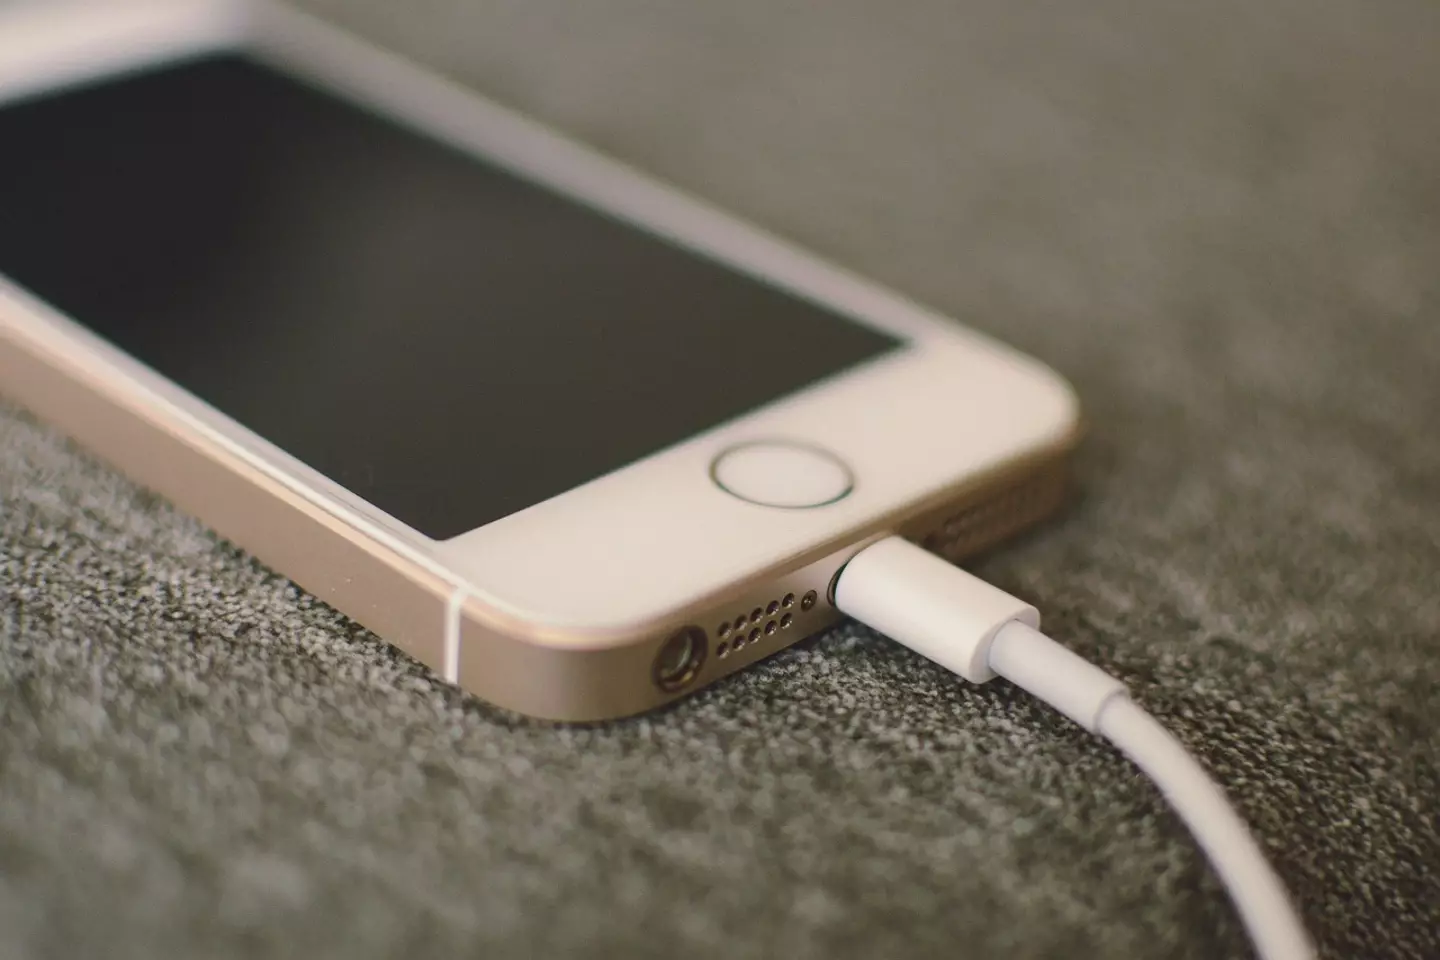 An expert says you shouldn't leave your phone on charge overnight.